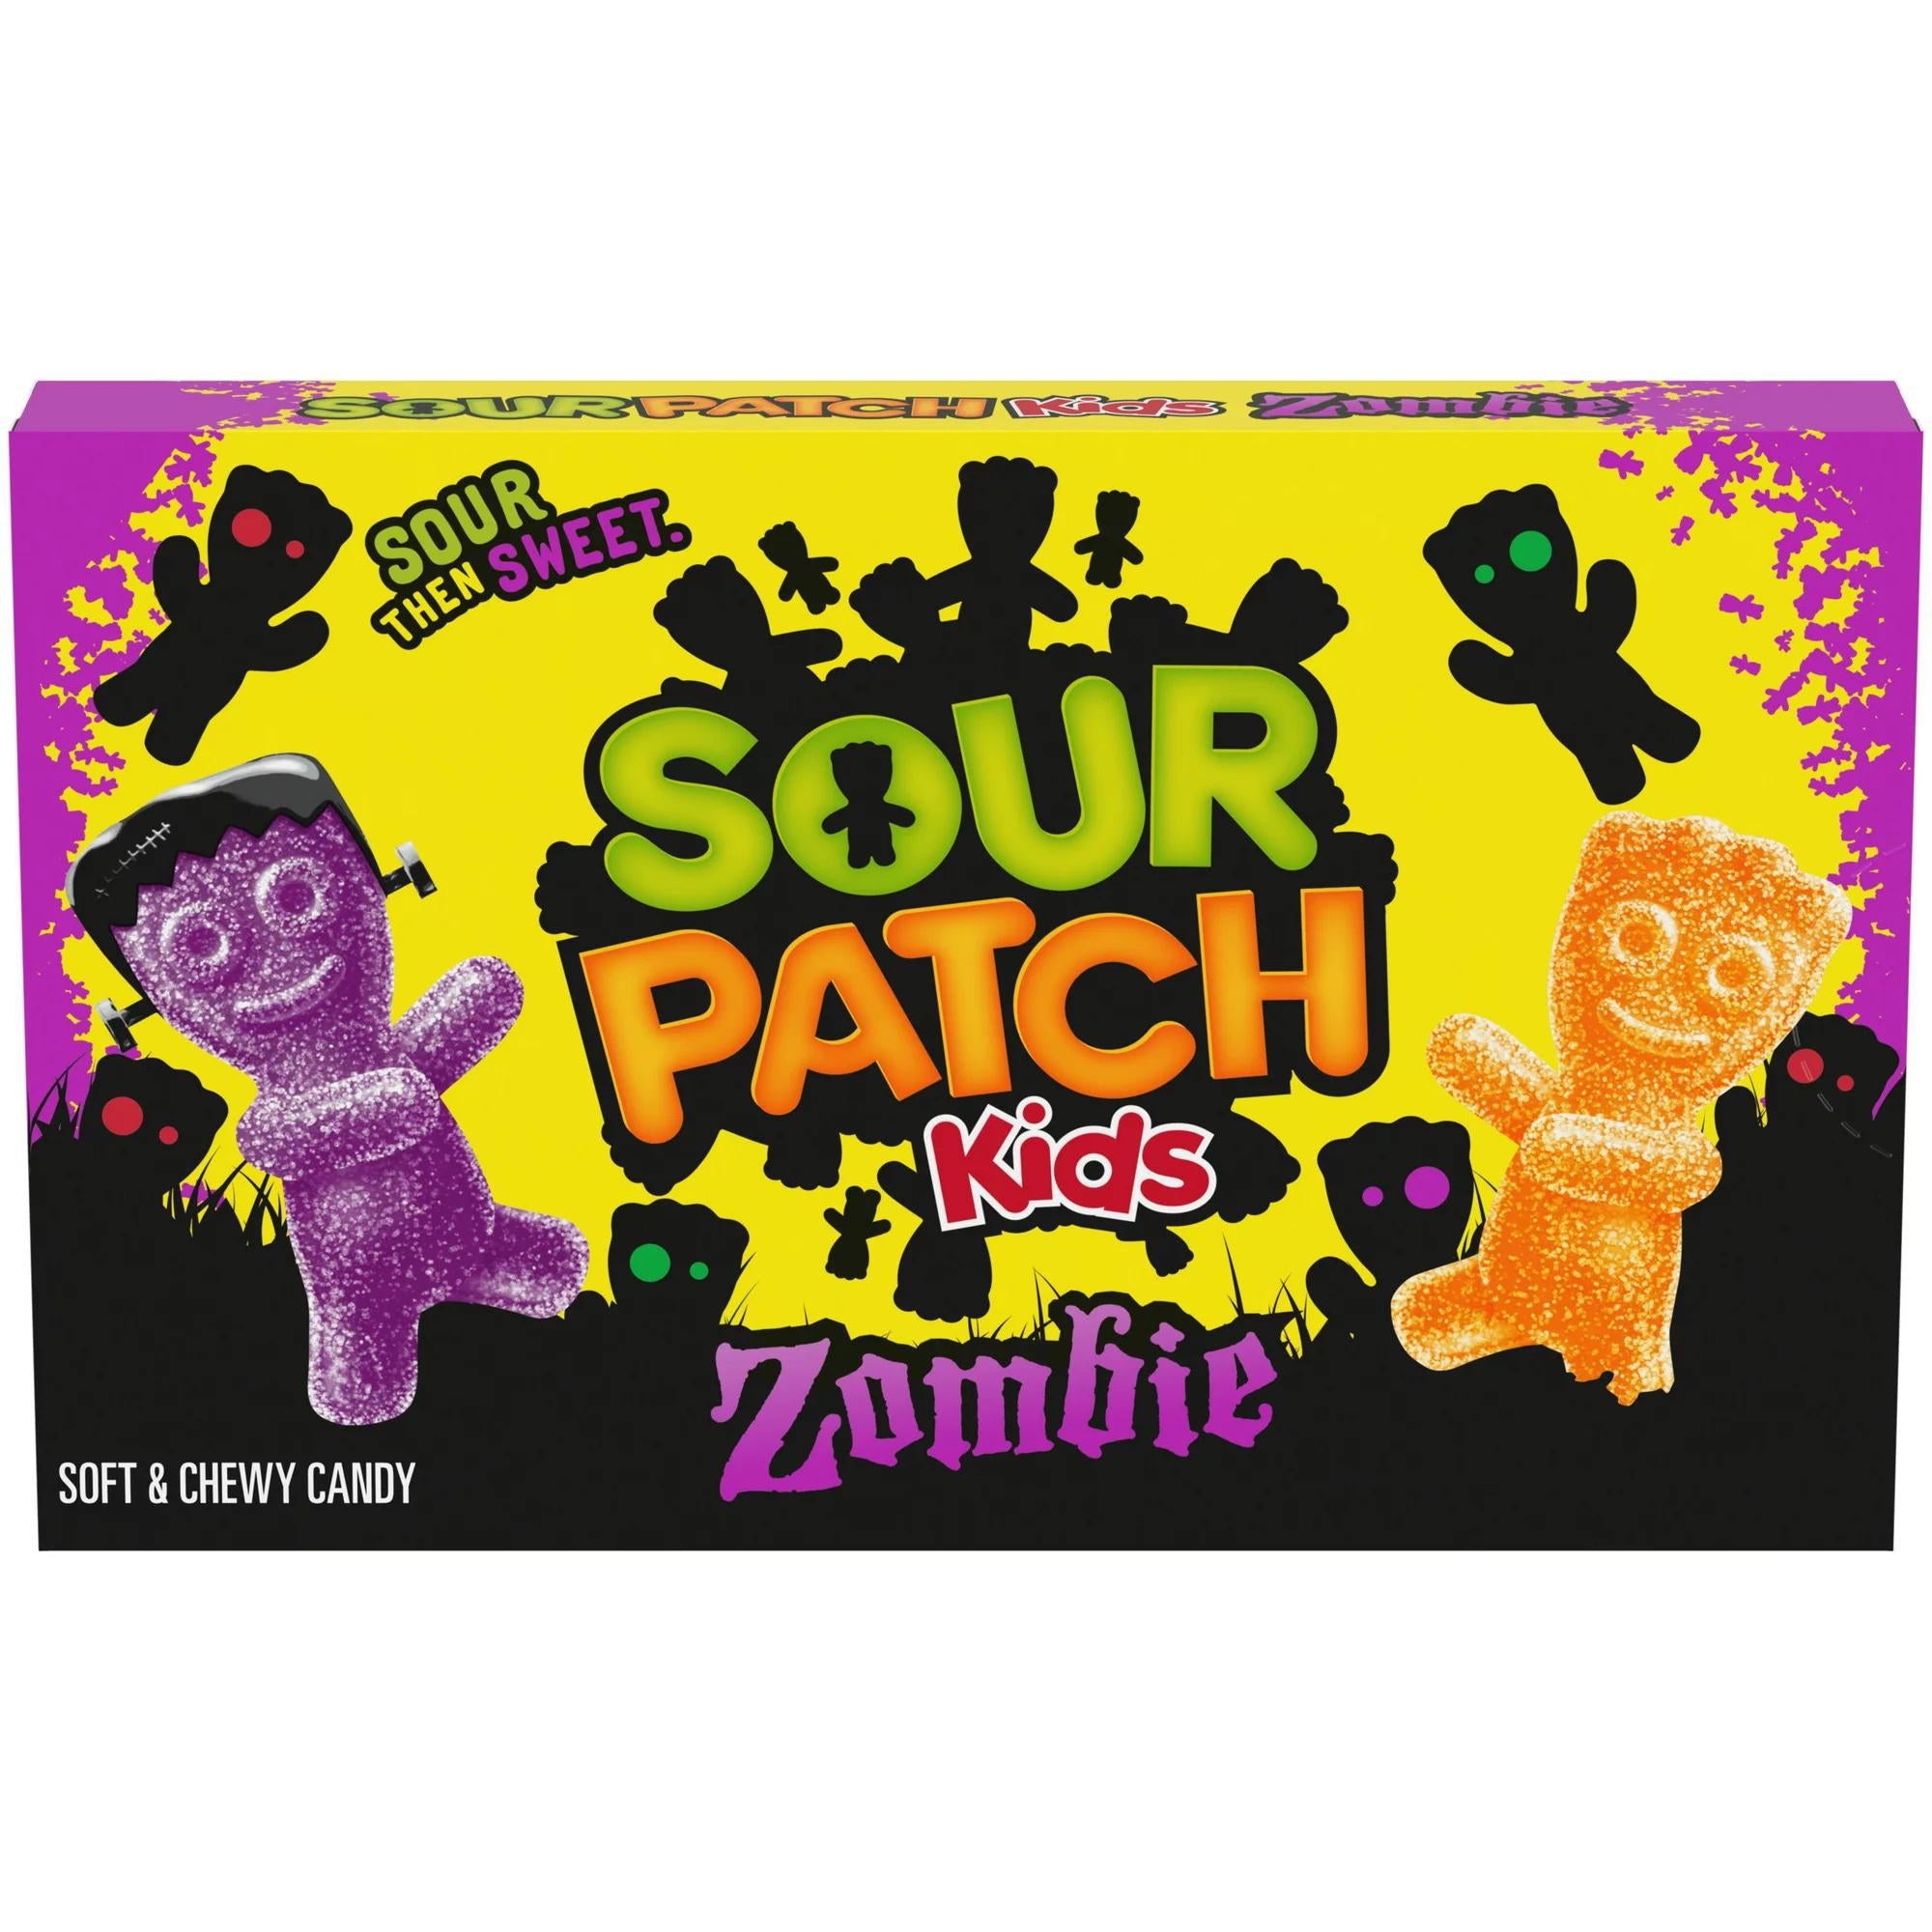 sour patch kids first theyre sour then theyre sweet